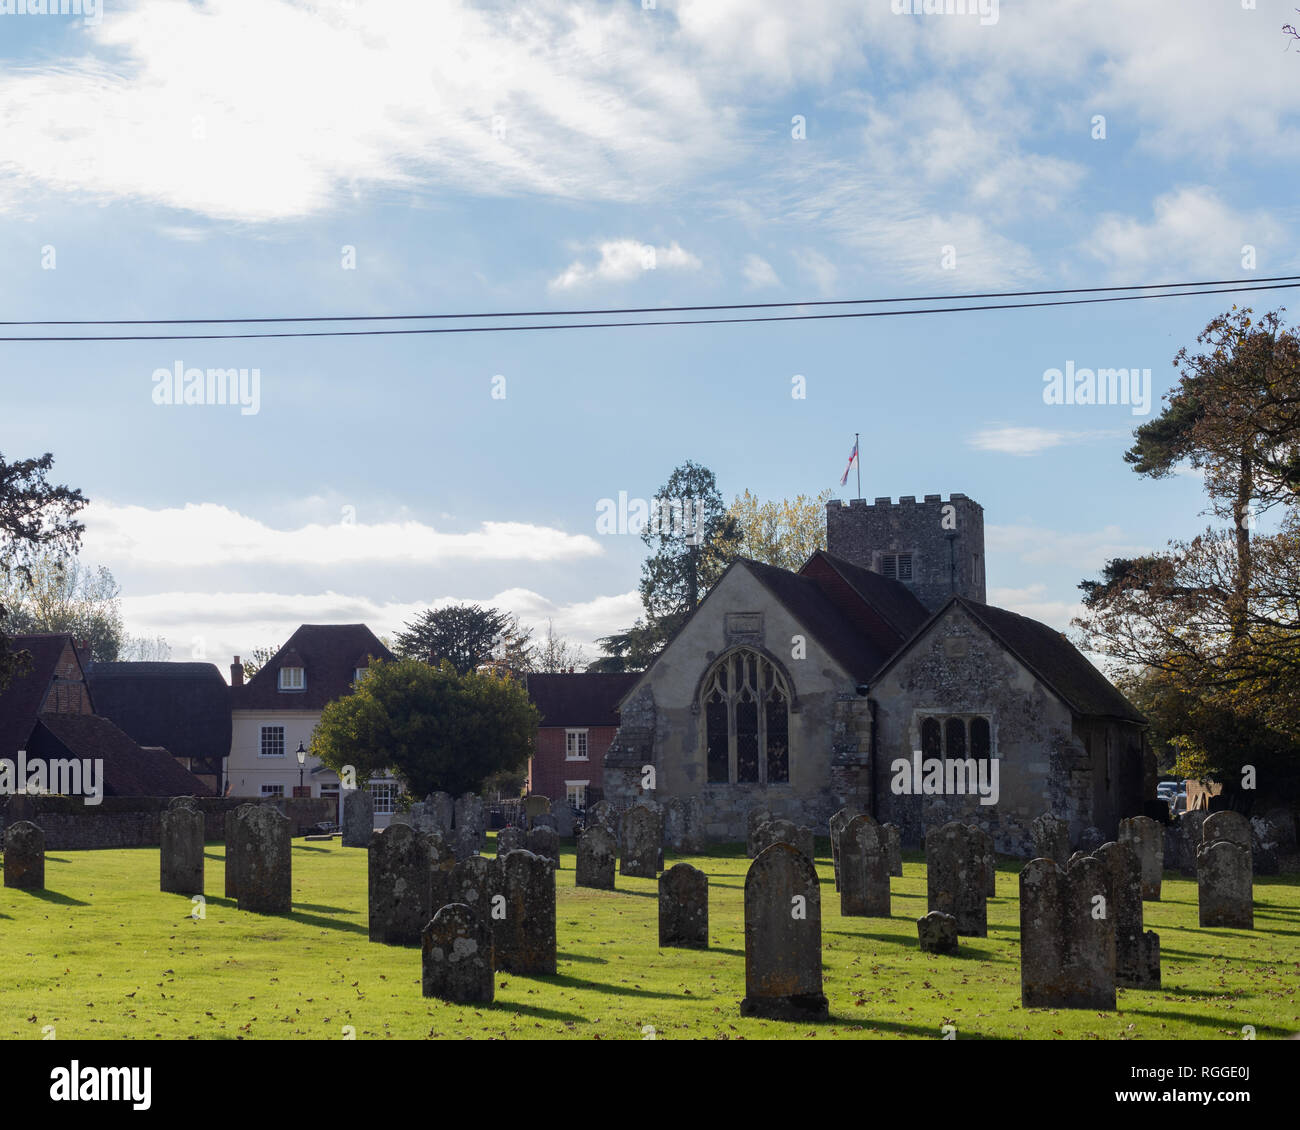 the graveyard at st James church southwick with grave yard in the foreground, a typical old English church Stock Photo